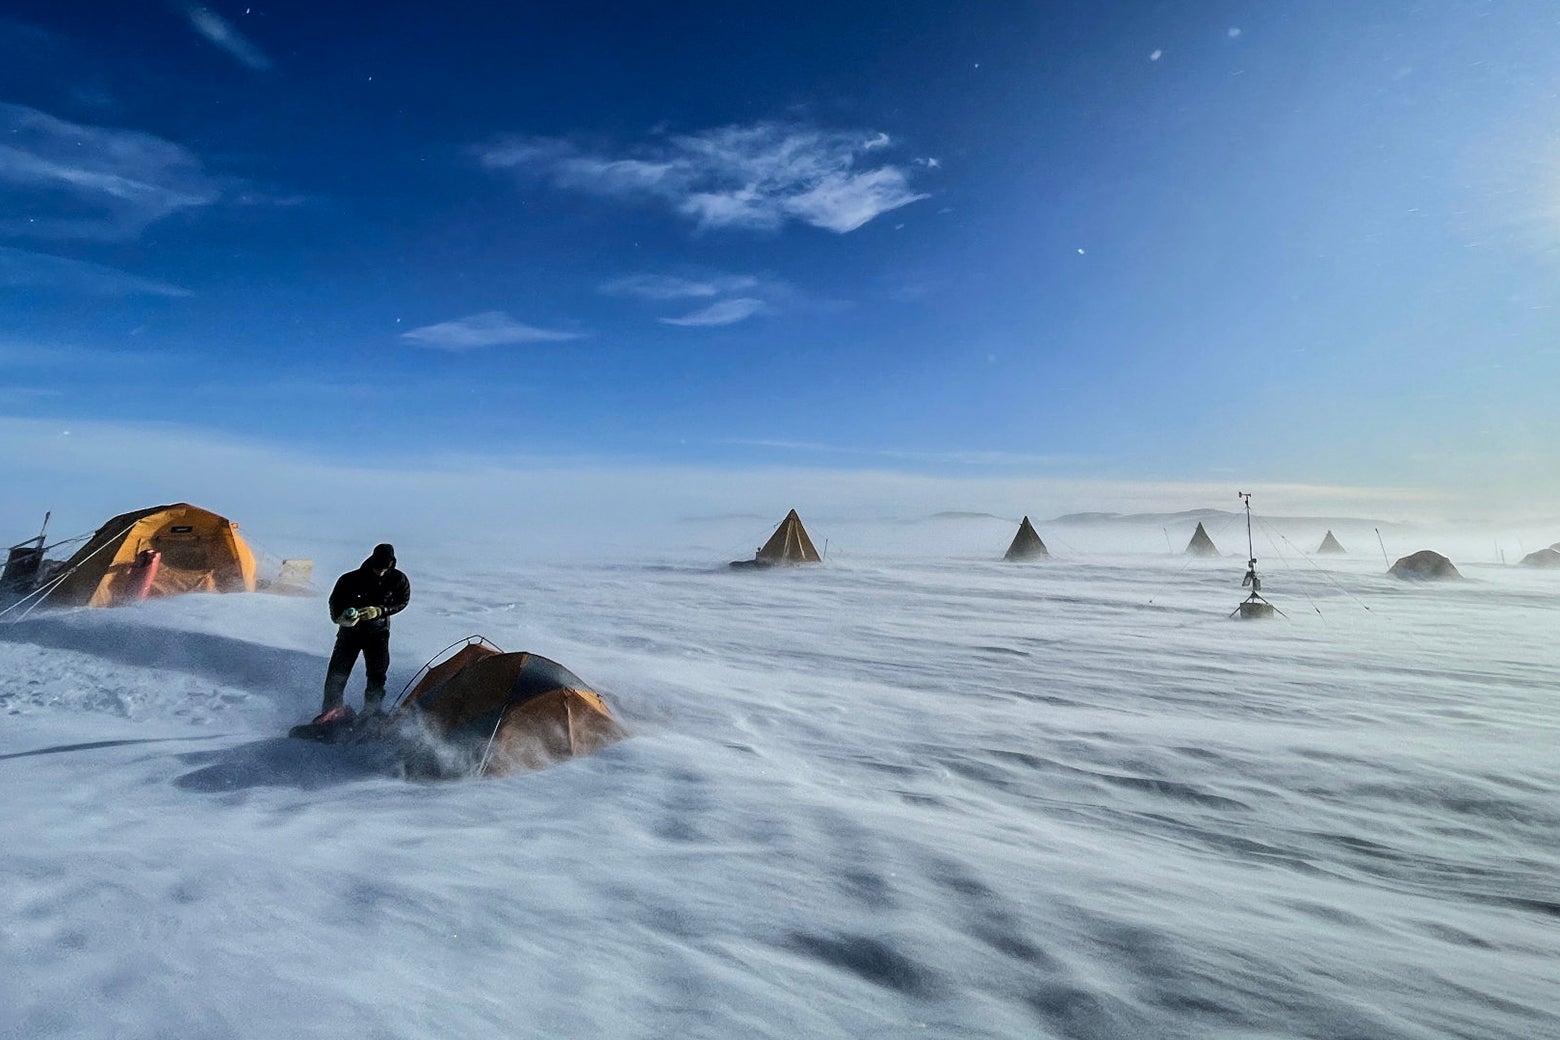 A person stands next to a tent in a landscape covered in snow, five more tents can be seen in the background.